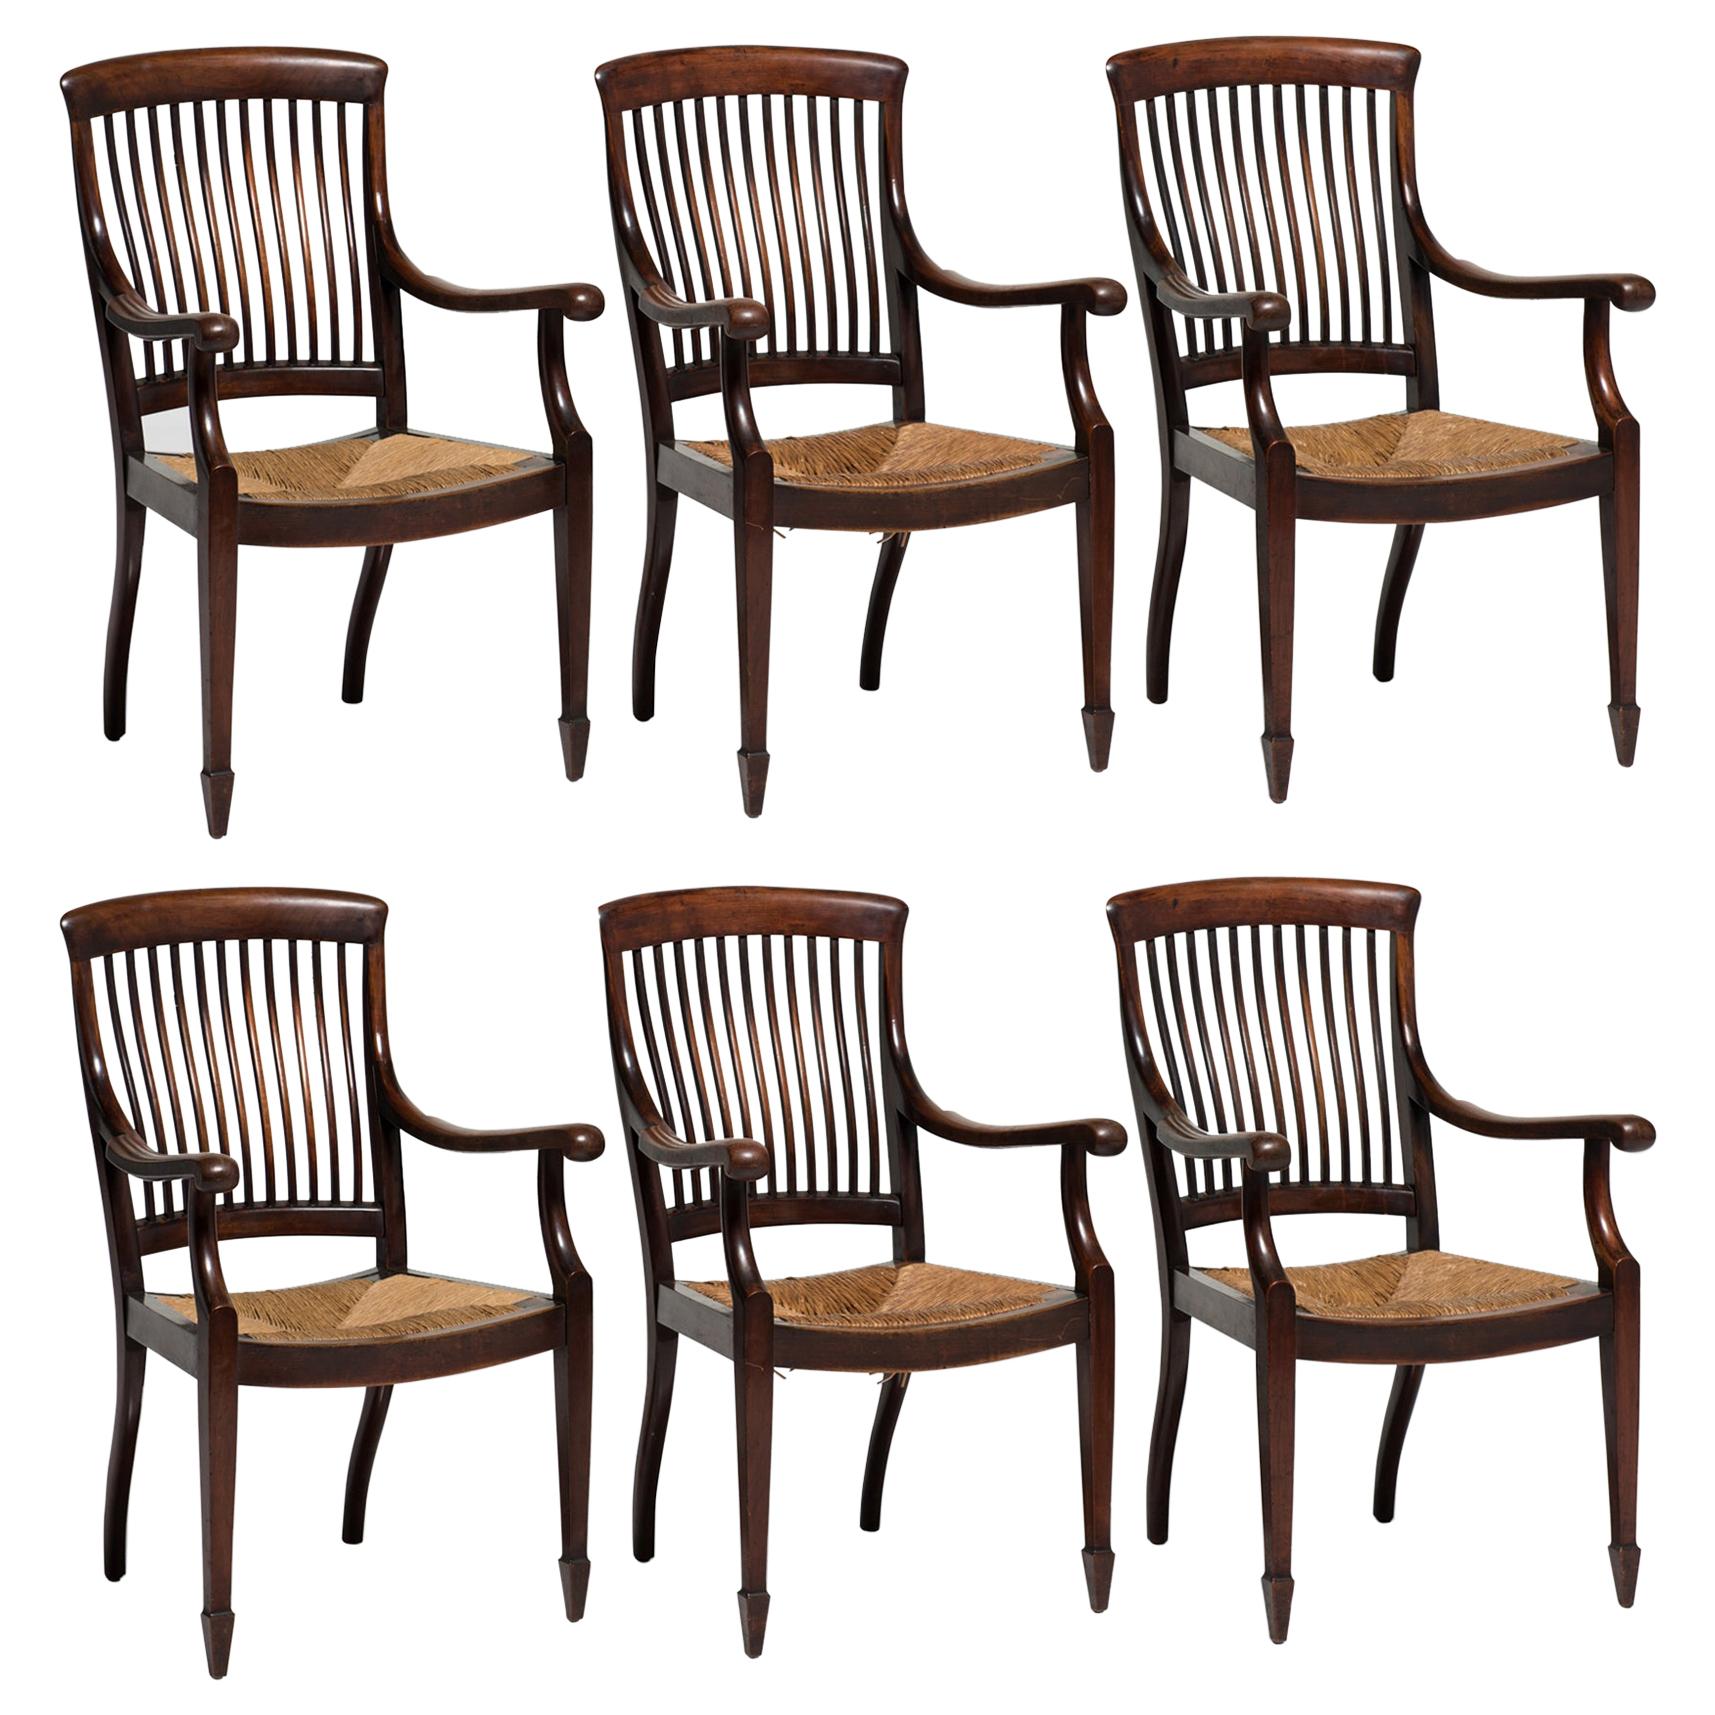 Rare gentleman’s club armchairs, England, 19th century.

Made in solid walnut with original rush seats and makers label.